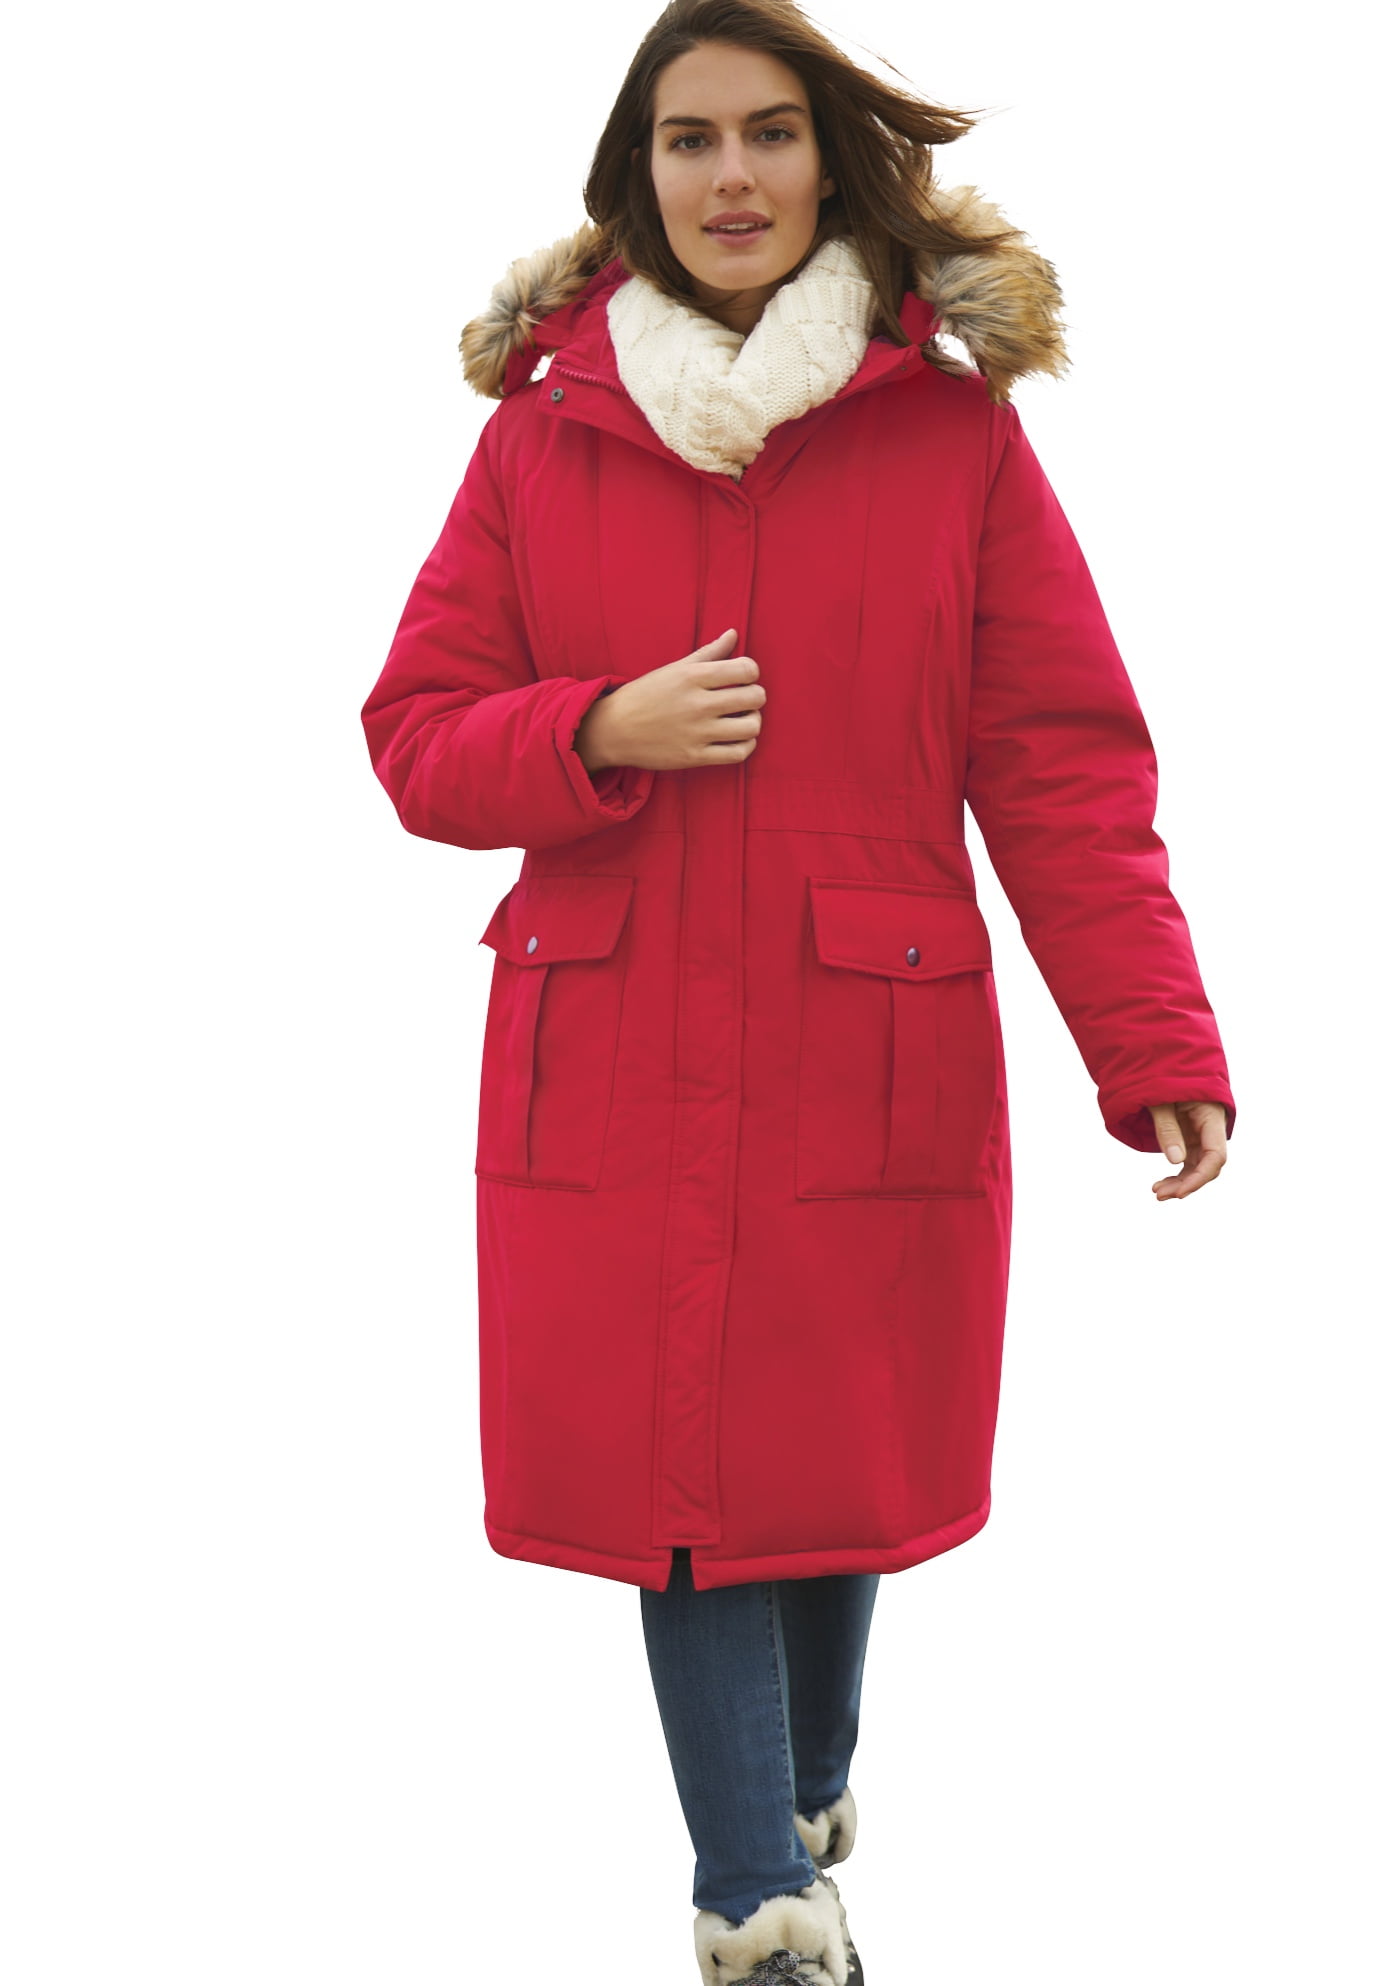 Even&Odd Women's Mid Length Parka Jacket in Red - Size M 